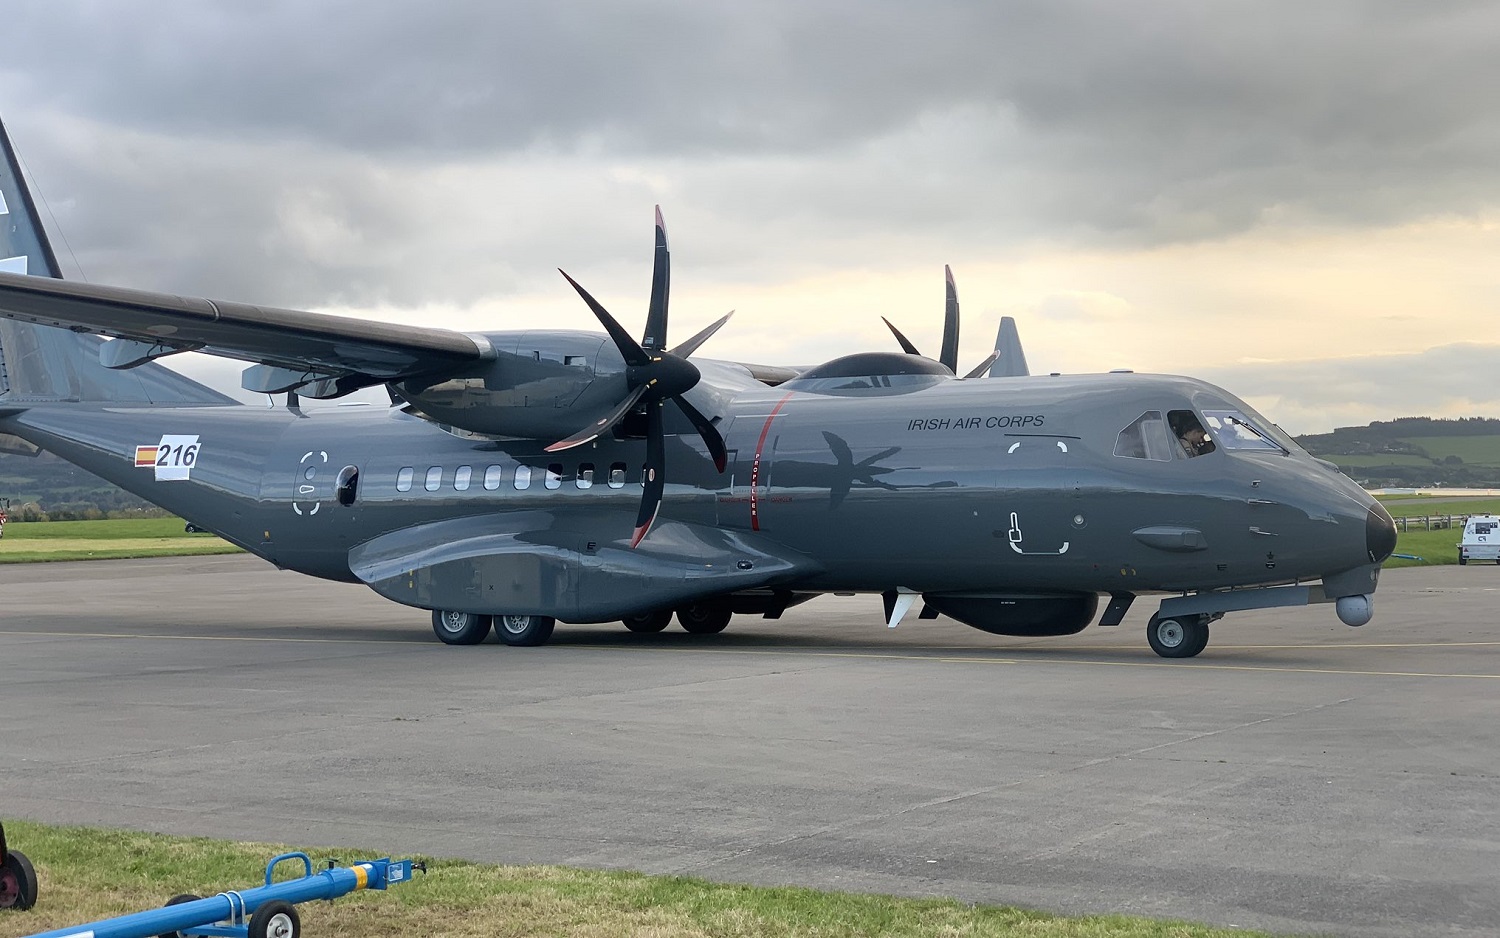 Airbus Delivers Second C-295 Maritime Patrol Aircraft to Irish Air Corps